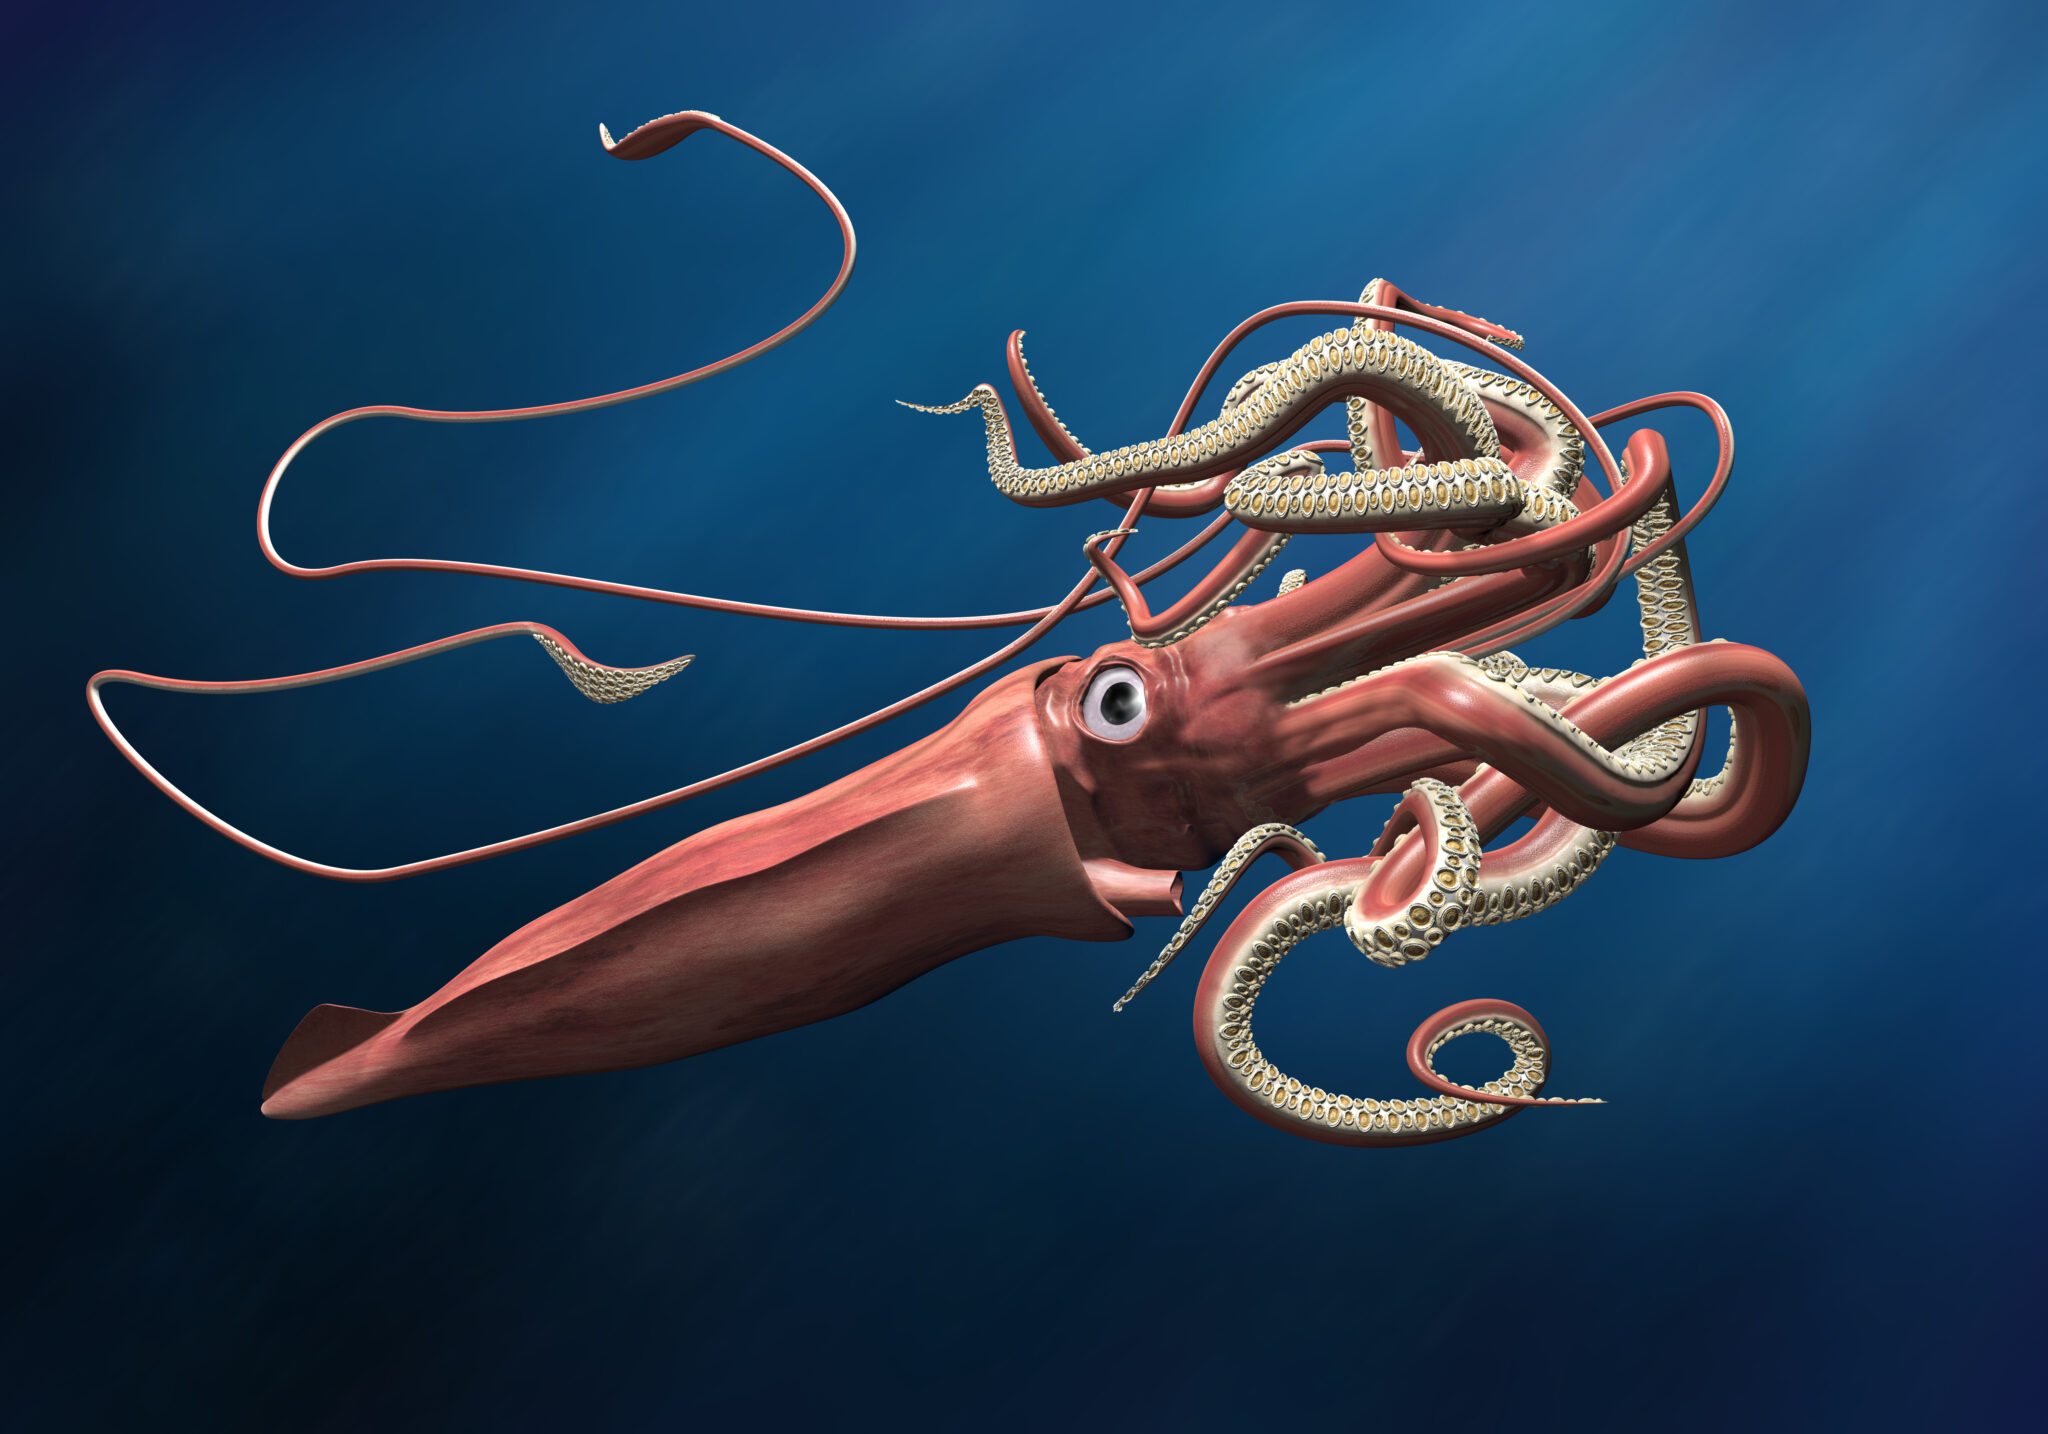 a computer generated graphic showing a giant squid in deep blue water